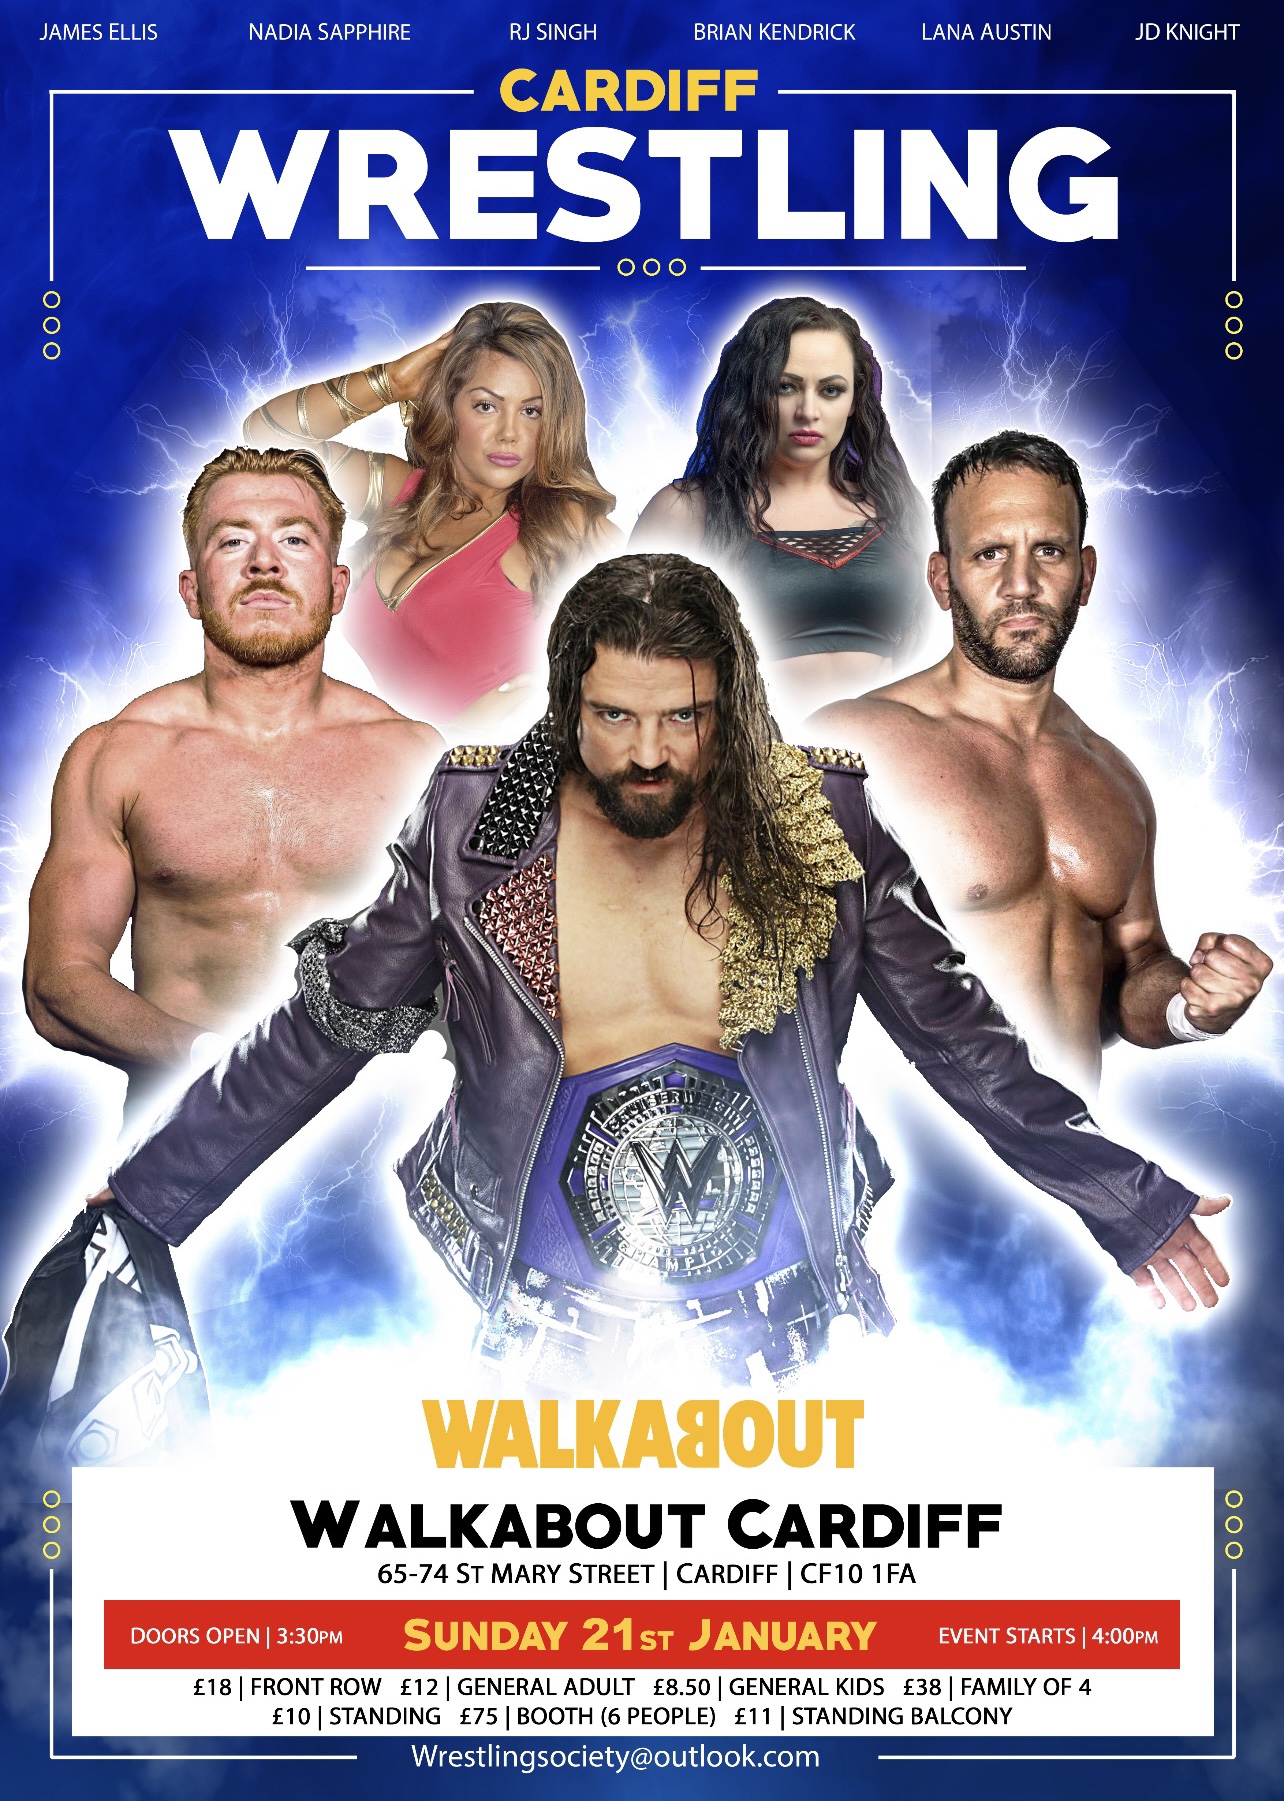 Former WWE Star Brian Kendrick comes to CARDIFF event description image